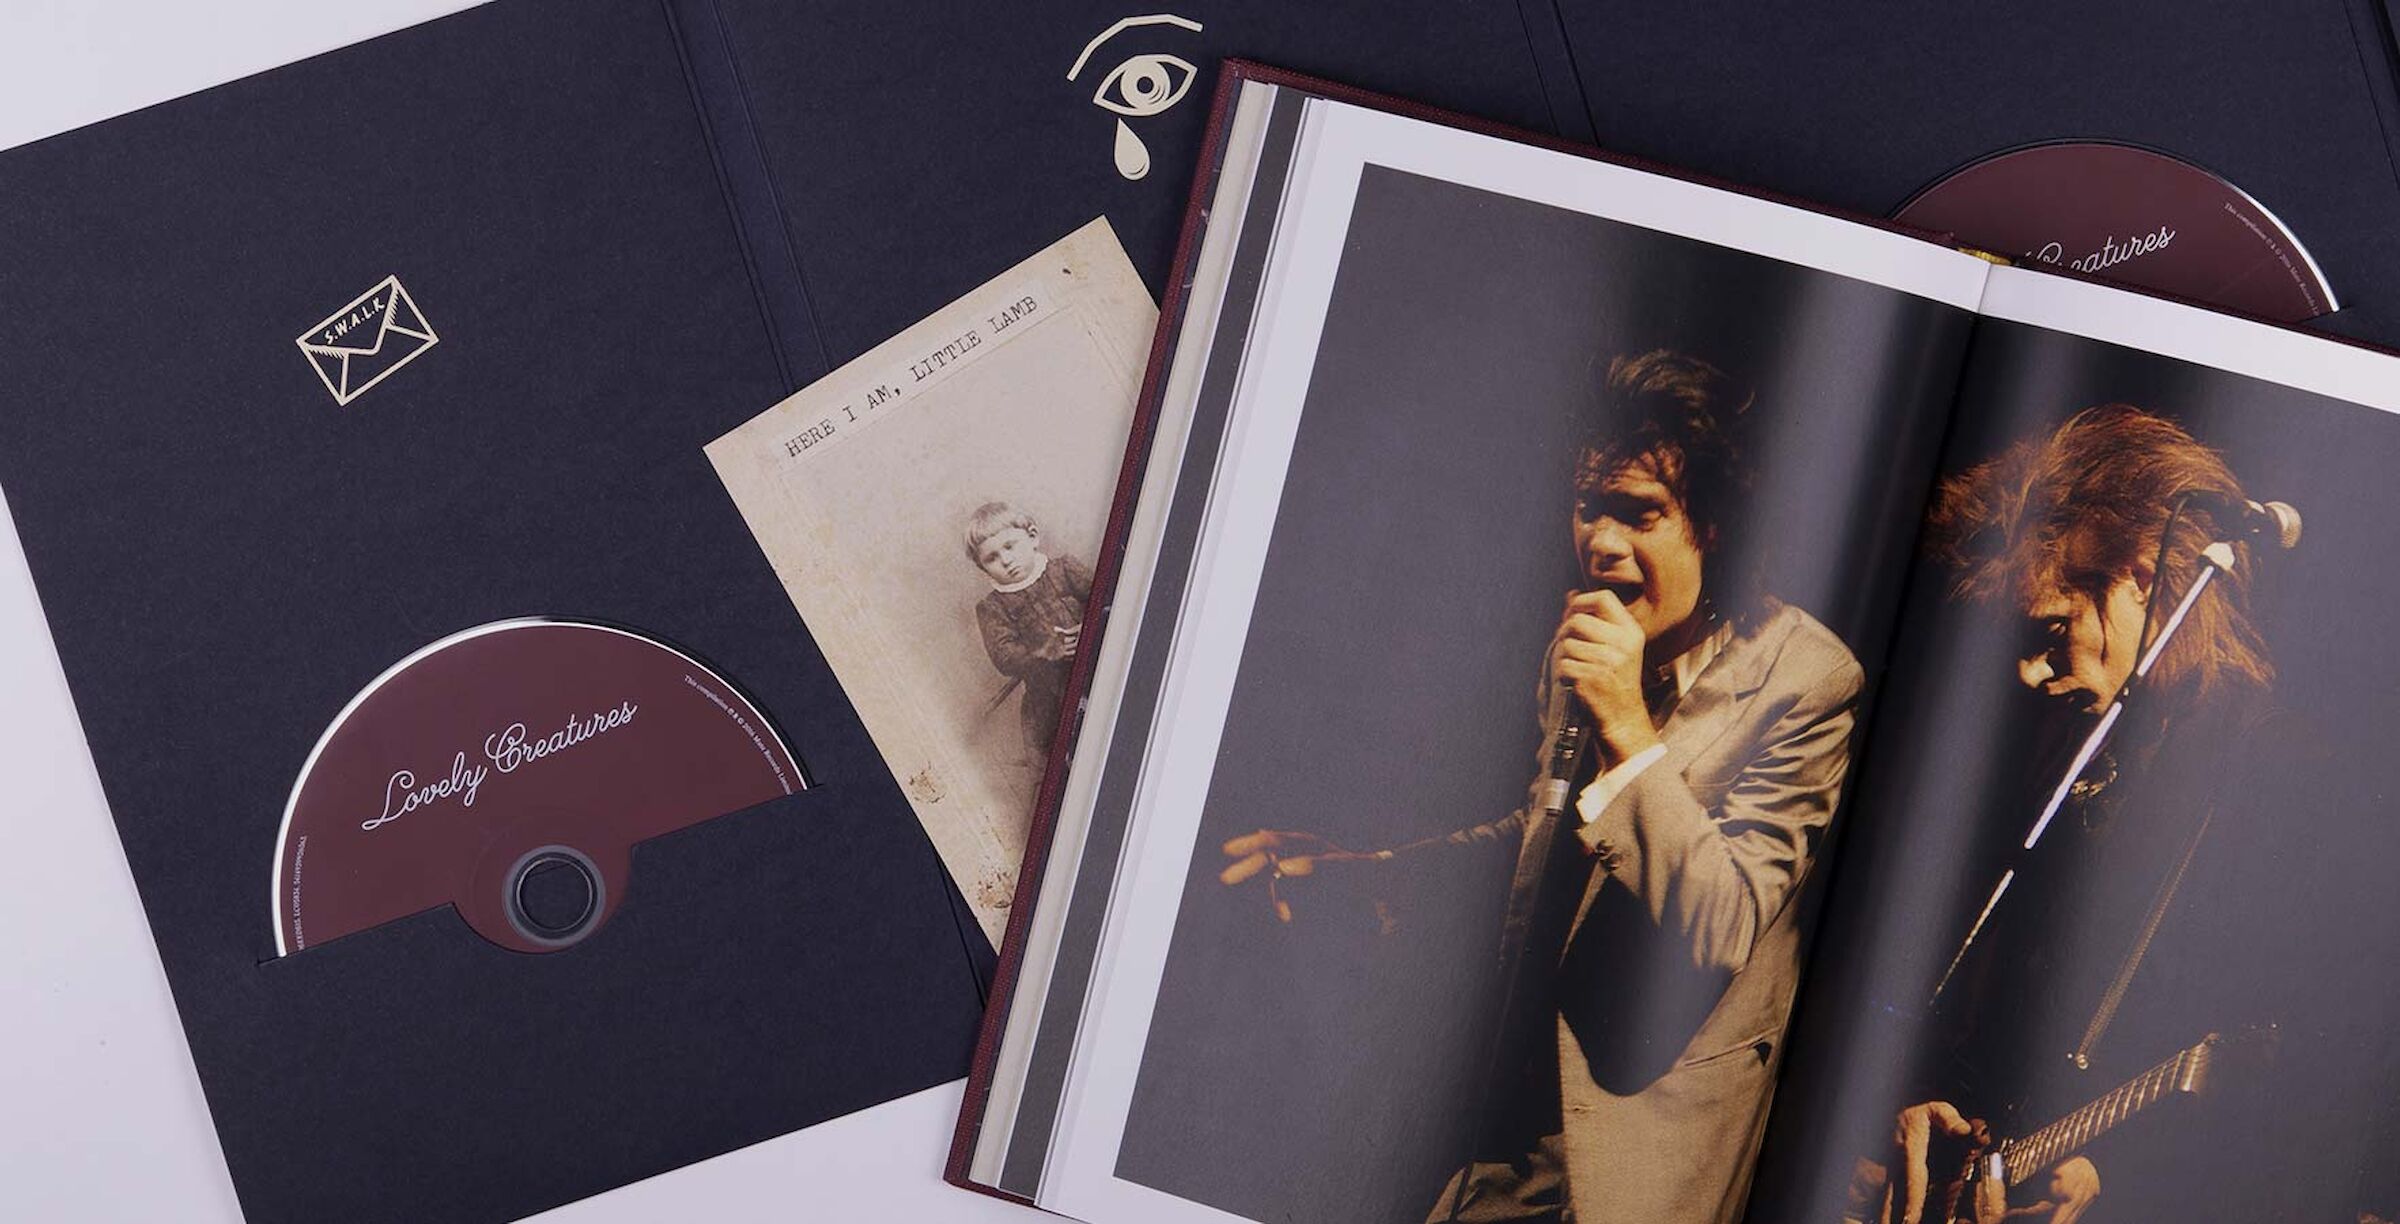 Nick Cave and The Bad Seeds - Lovely Creatures Deluxe Edition casebound book and CDs